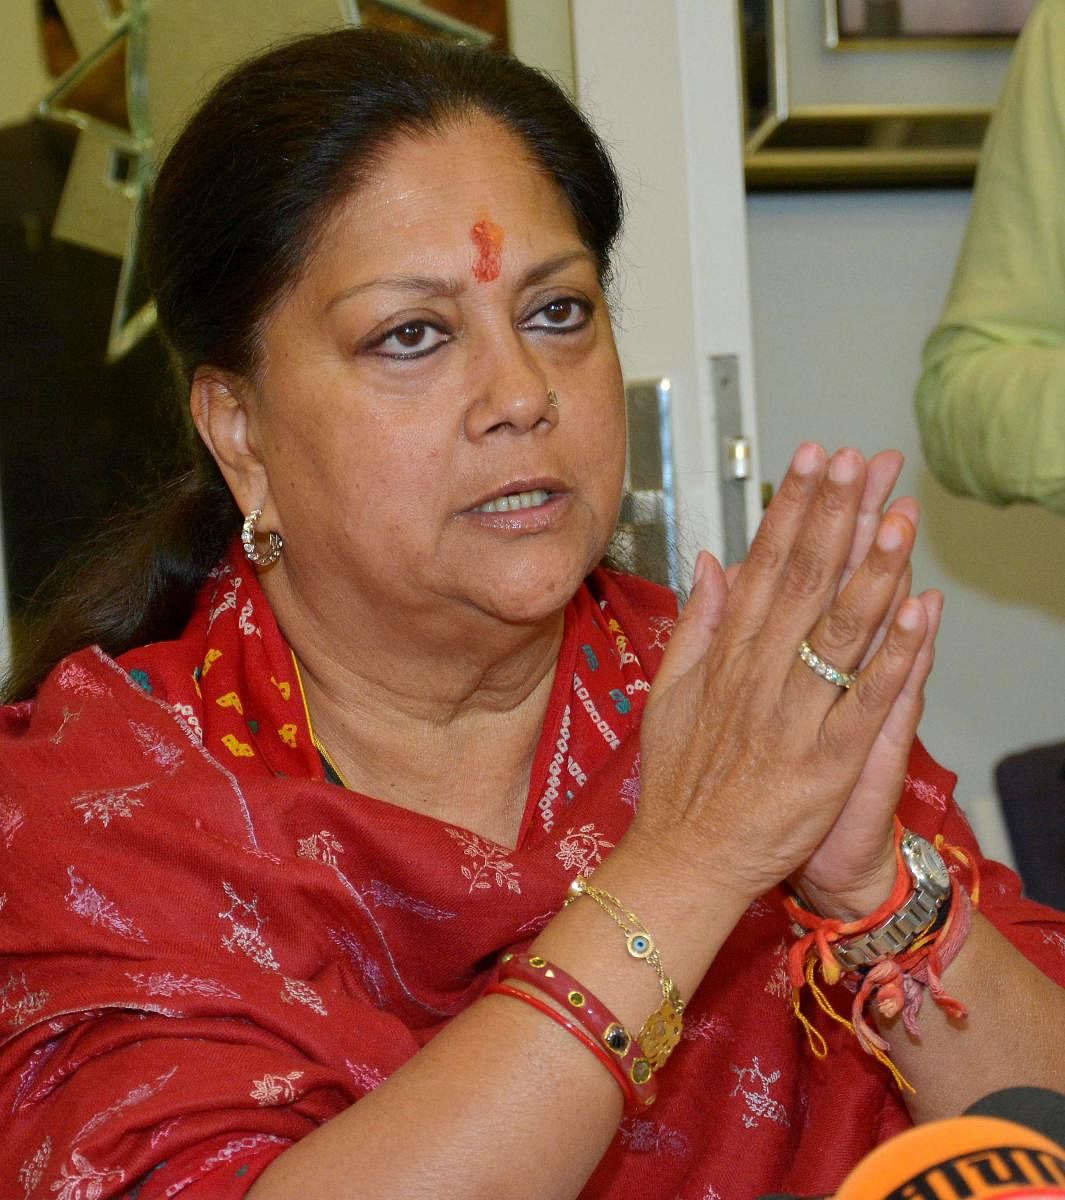 Rajasthan's outgoing Chief Minister Vasundhara Raje speaks to the media after the announcement of Assembly election results, in Jaipur, Tuesday, Dec. 11, 2018. PTI